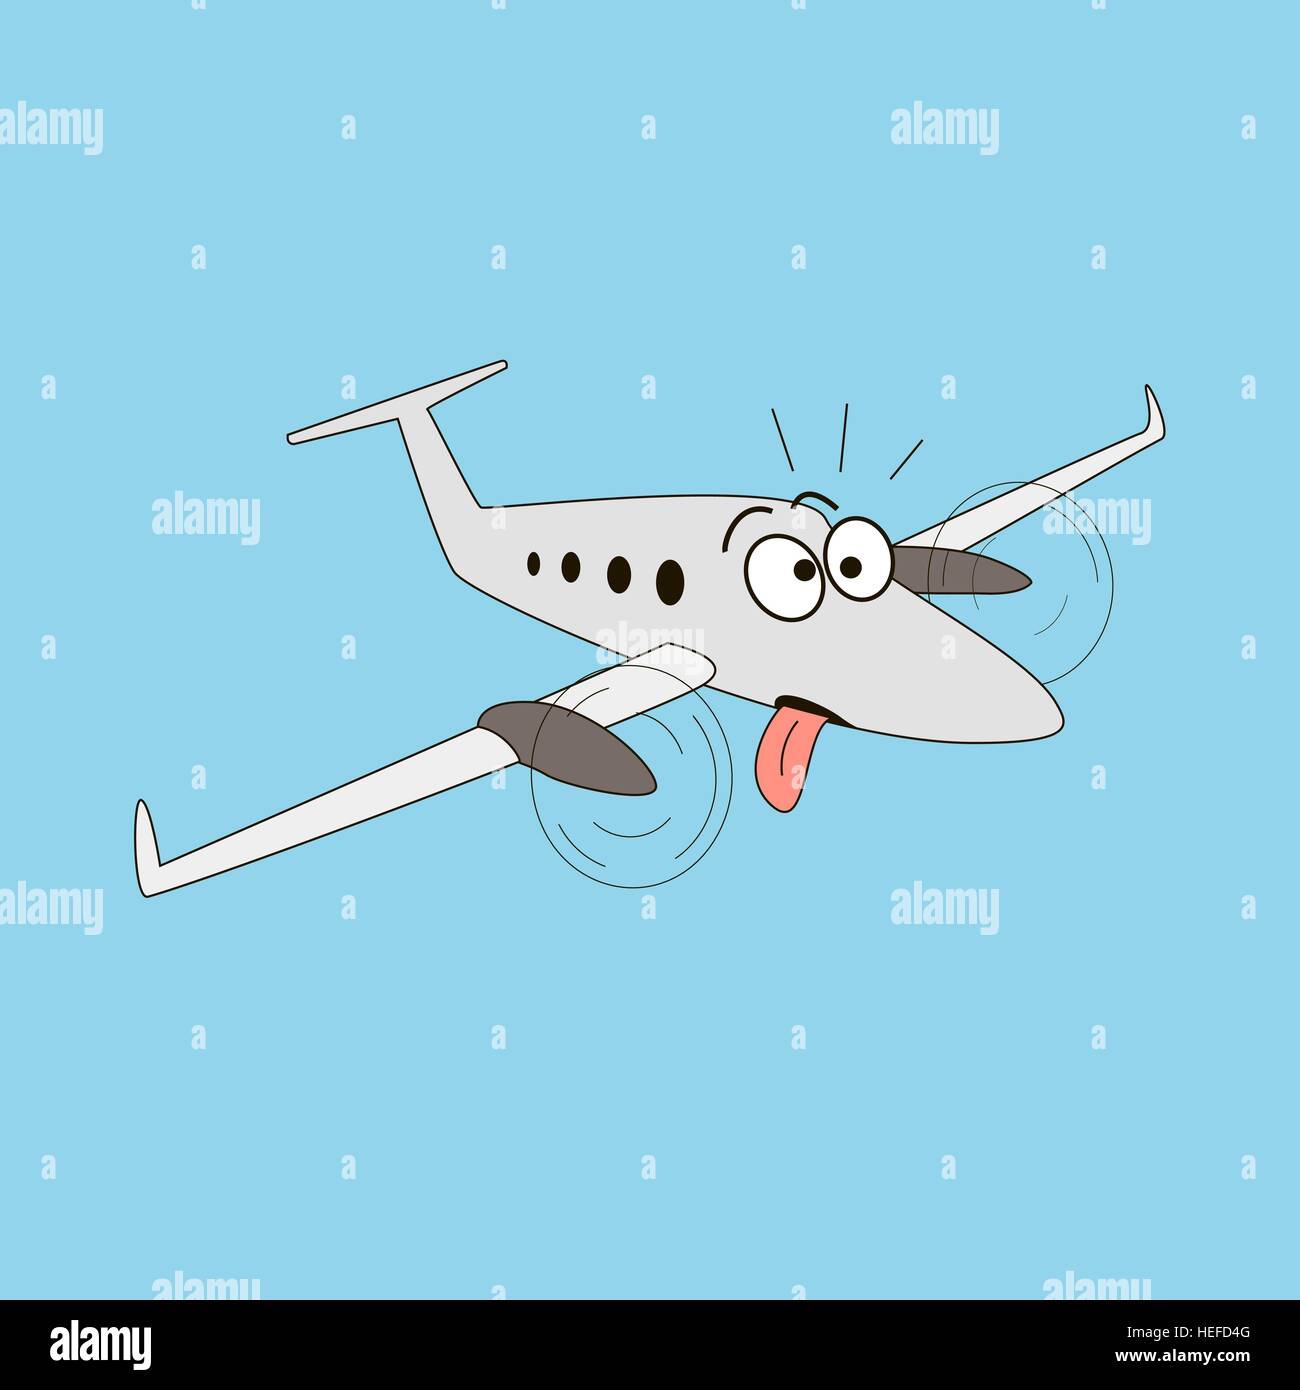 Cartoon style airplane with rolling eyes and protruding tongue. Stock Vector